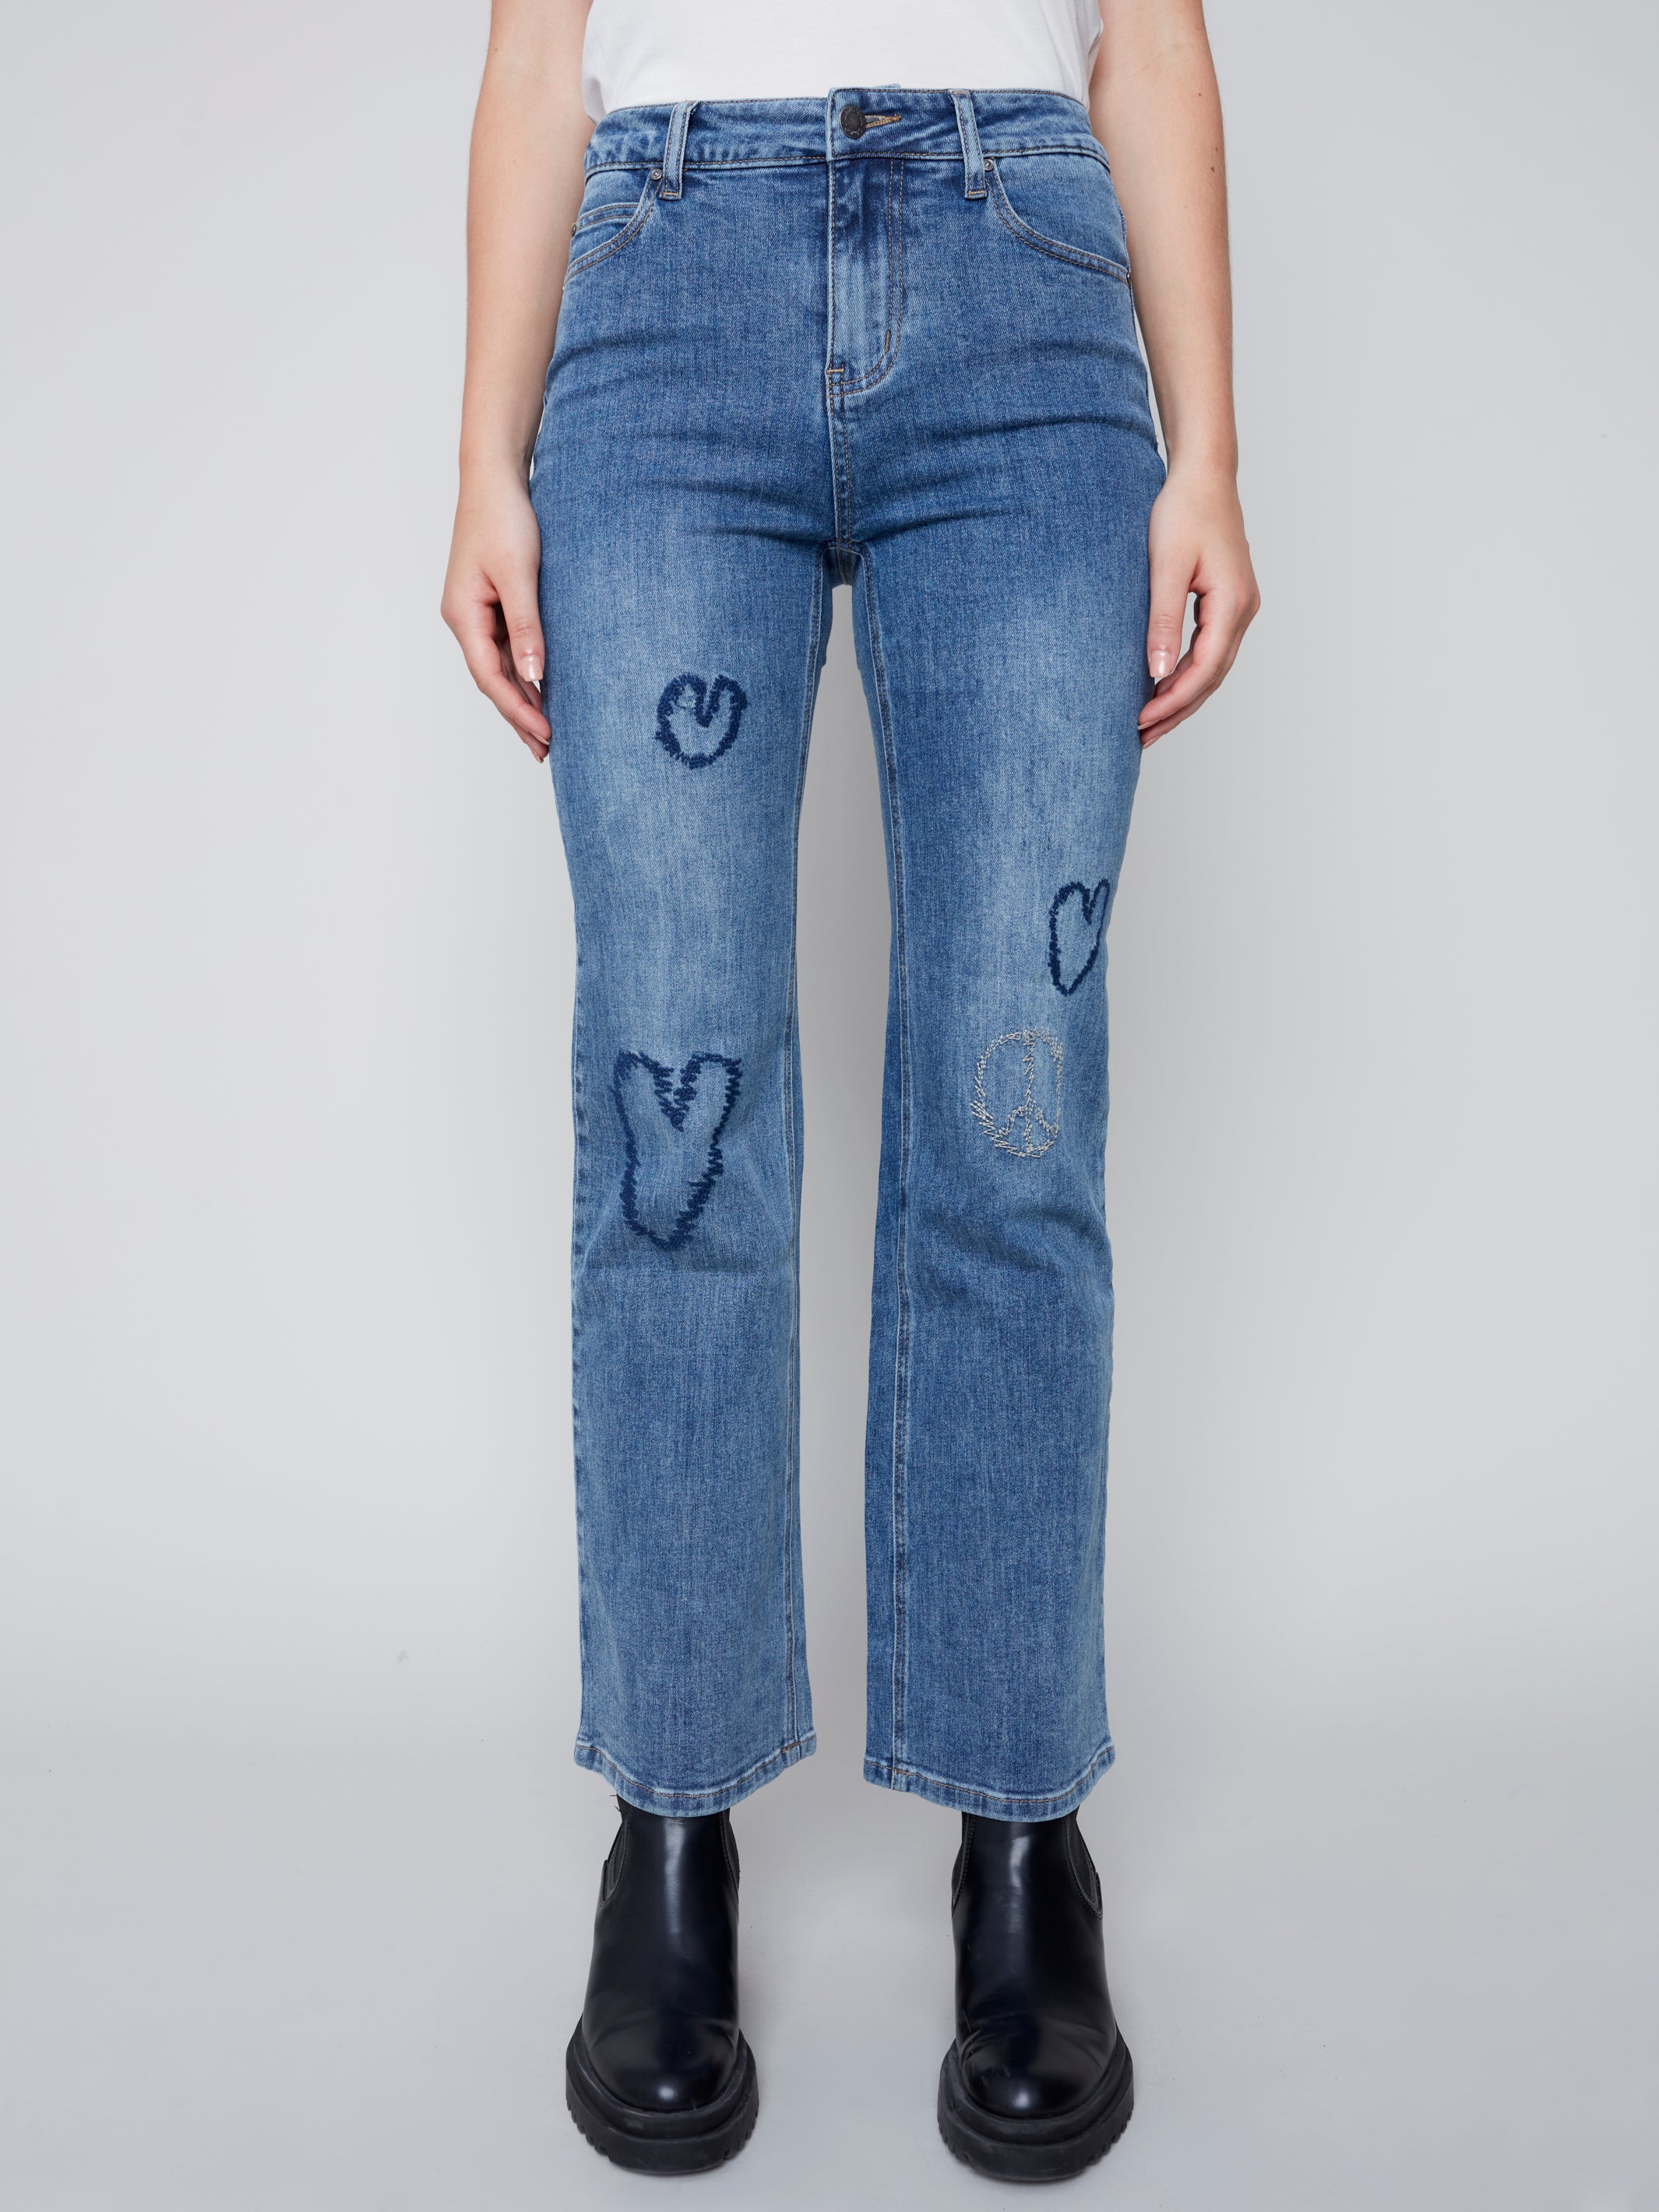 Straight Leg Jeans with Heart Embroidery by Charlie B